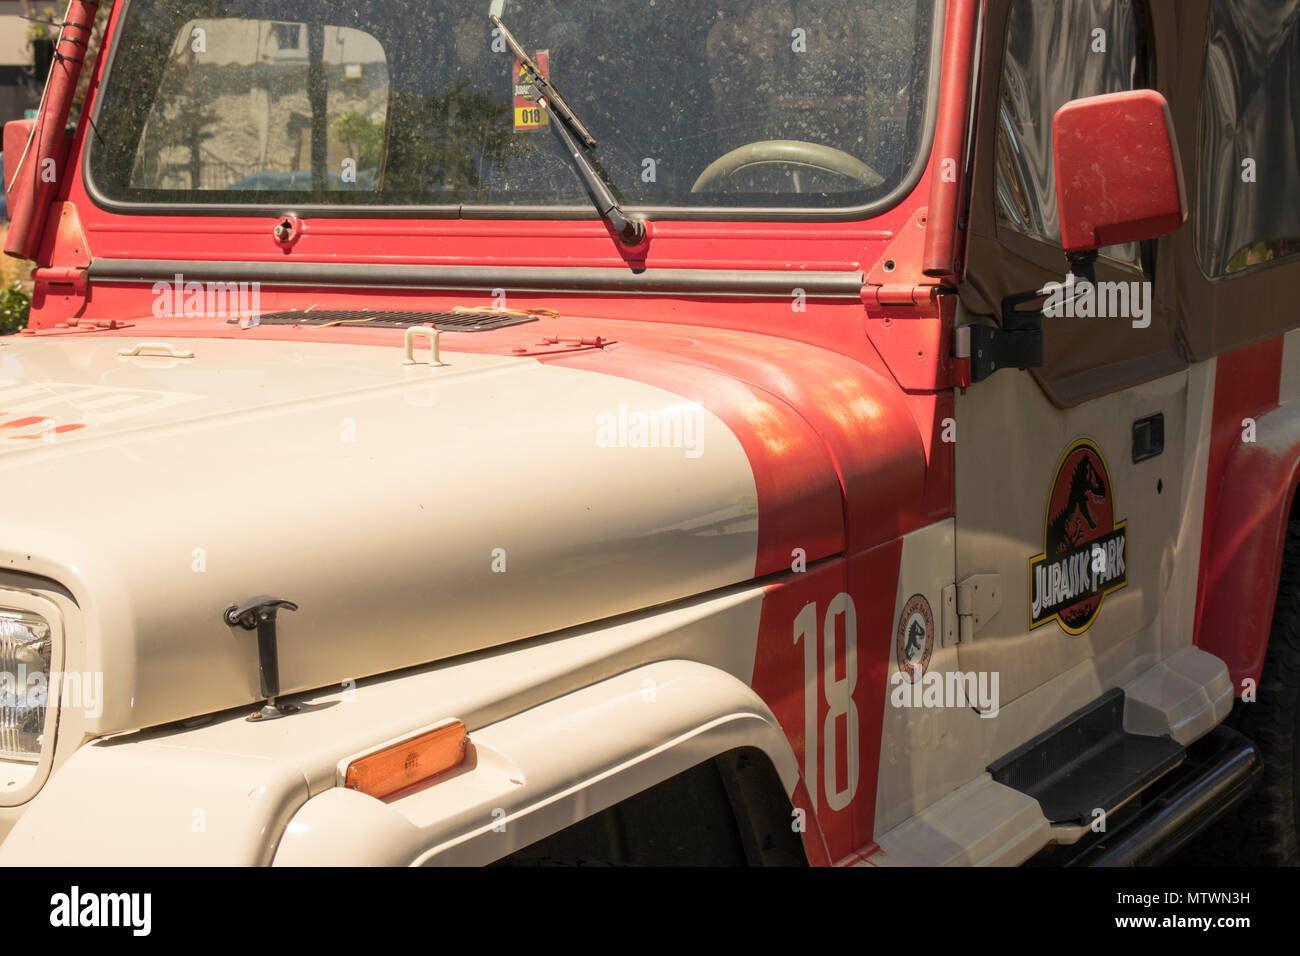 Campbell, California, USA - May 28, 2018: Jurassic Park Jeep Wrangler  Number 18, as seen in the Jurassic Park and Jurassic World movie franchise  Stock Photo - Alamy